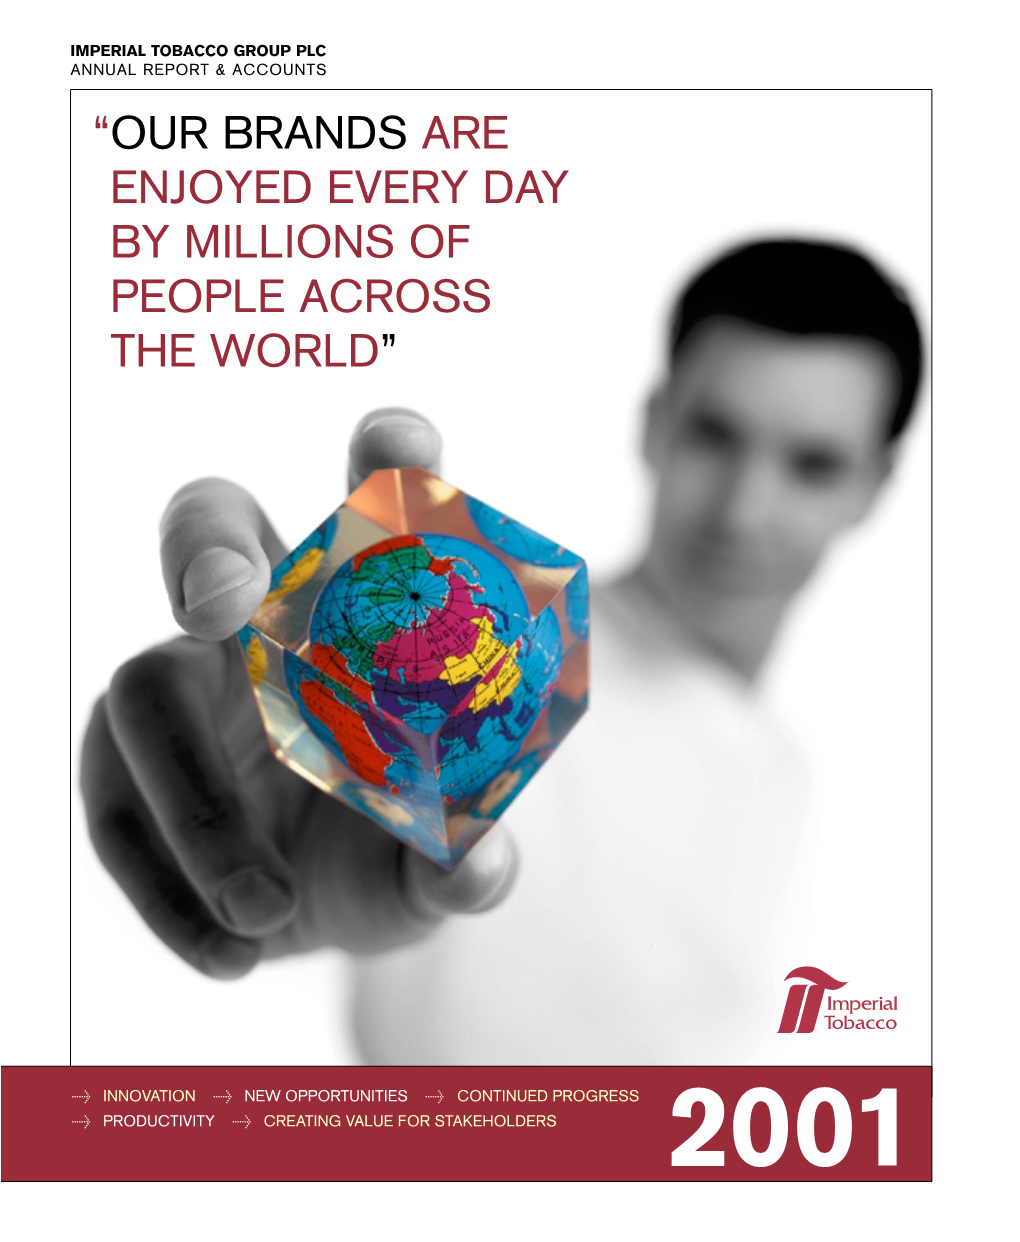 Our Brands Are Enjoyed Every Day by Millions of People Across the World”